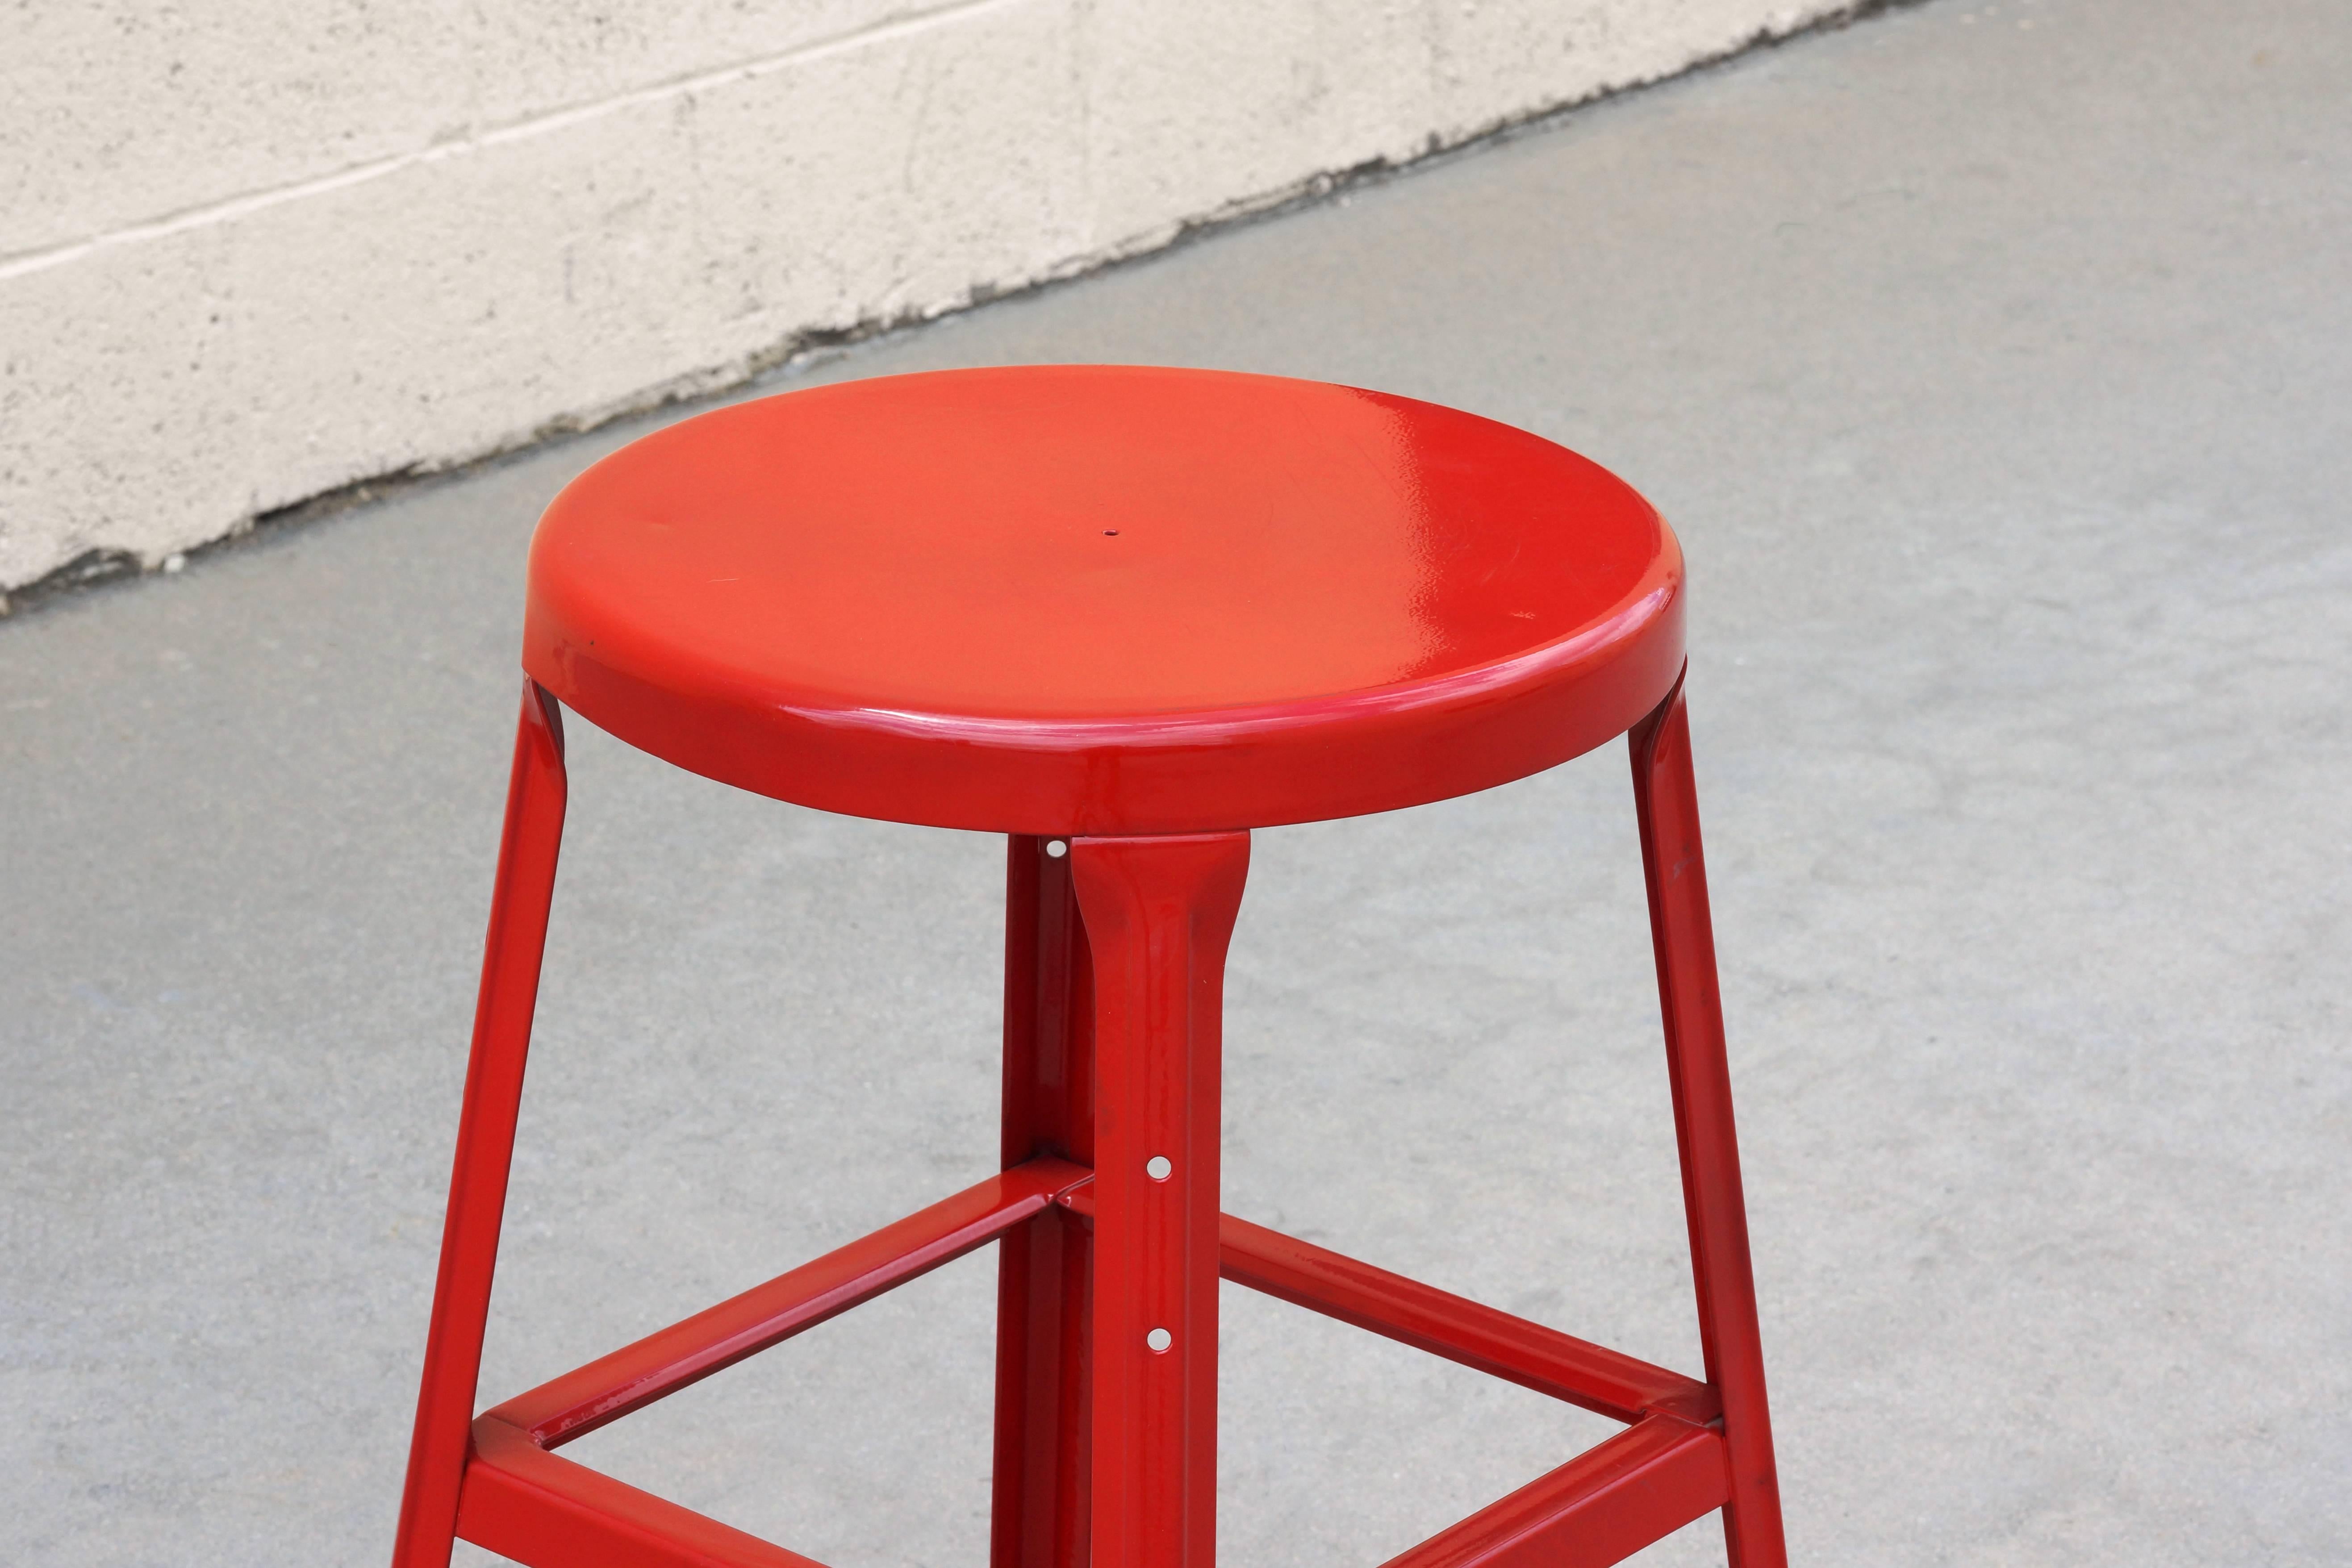 Powder-Coated 1940s Vintage Industrial Stool, Refinished